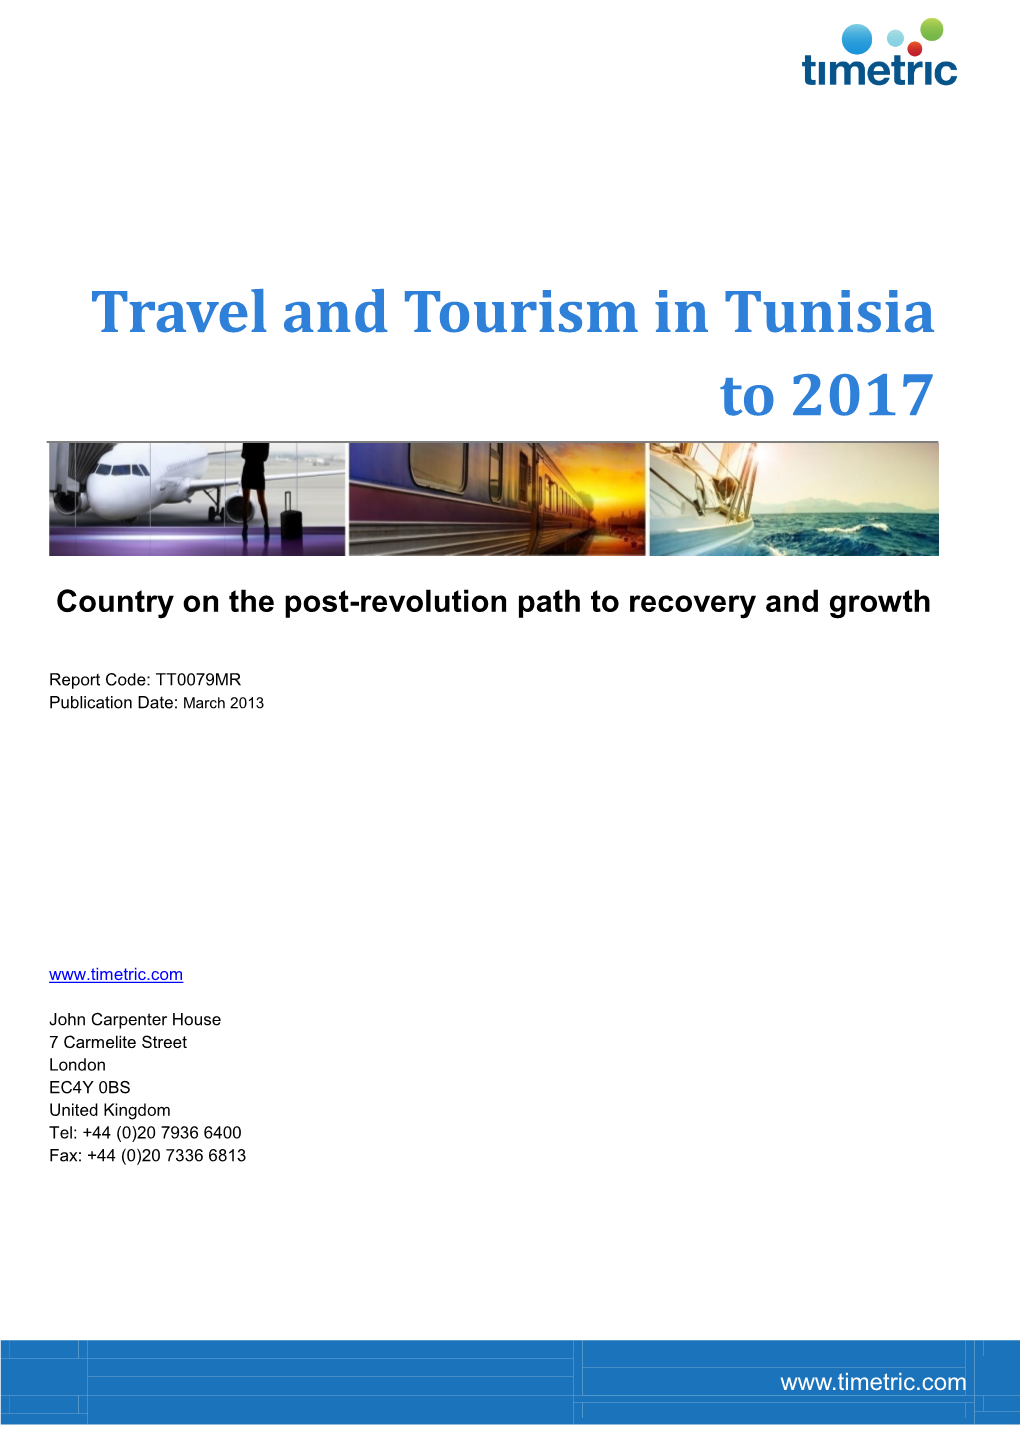 Travel and Tourism in Tunisia to 2017